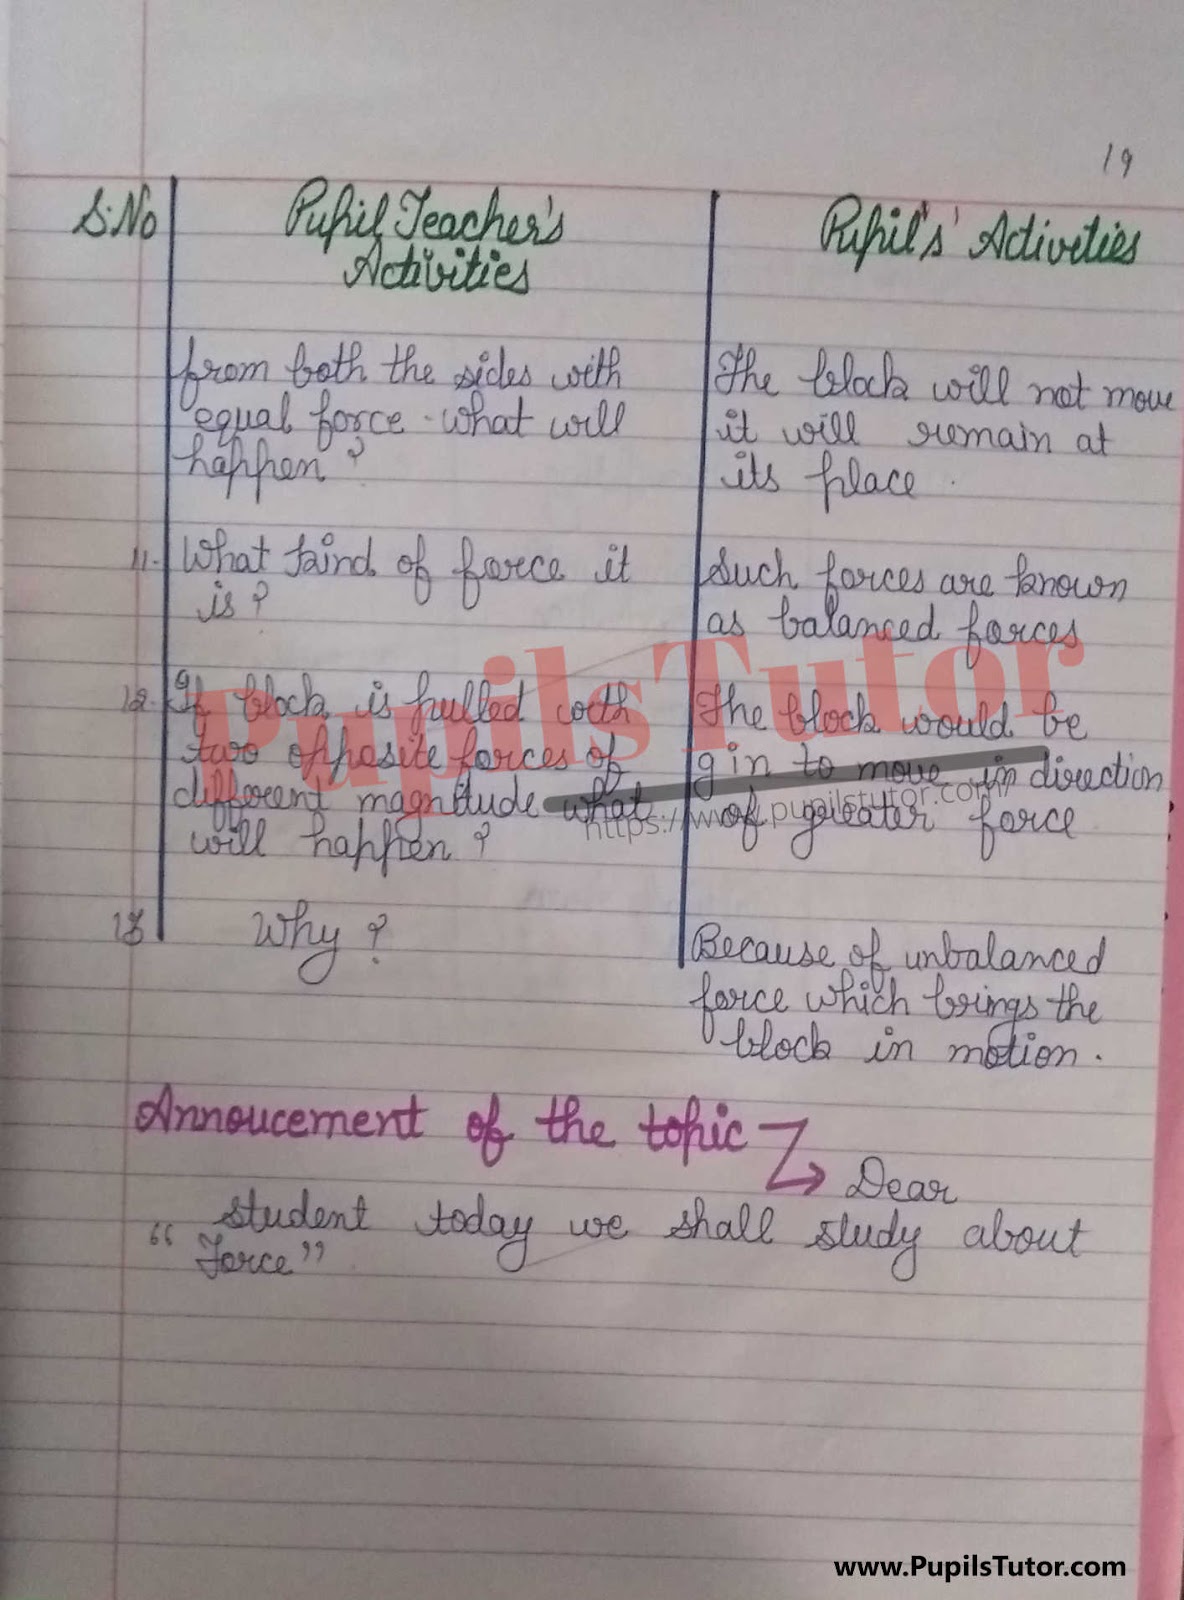 Physical Science Lesson Plan On Force For Class/Grade 8 And 9 For CBSE NCERT School And College Teachers  – (Page And Image Number 3) – www.pupilstutor.com